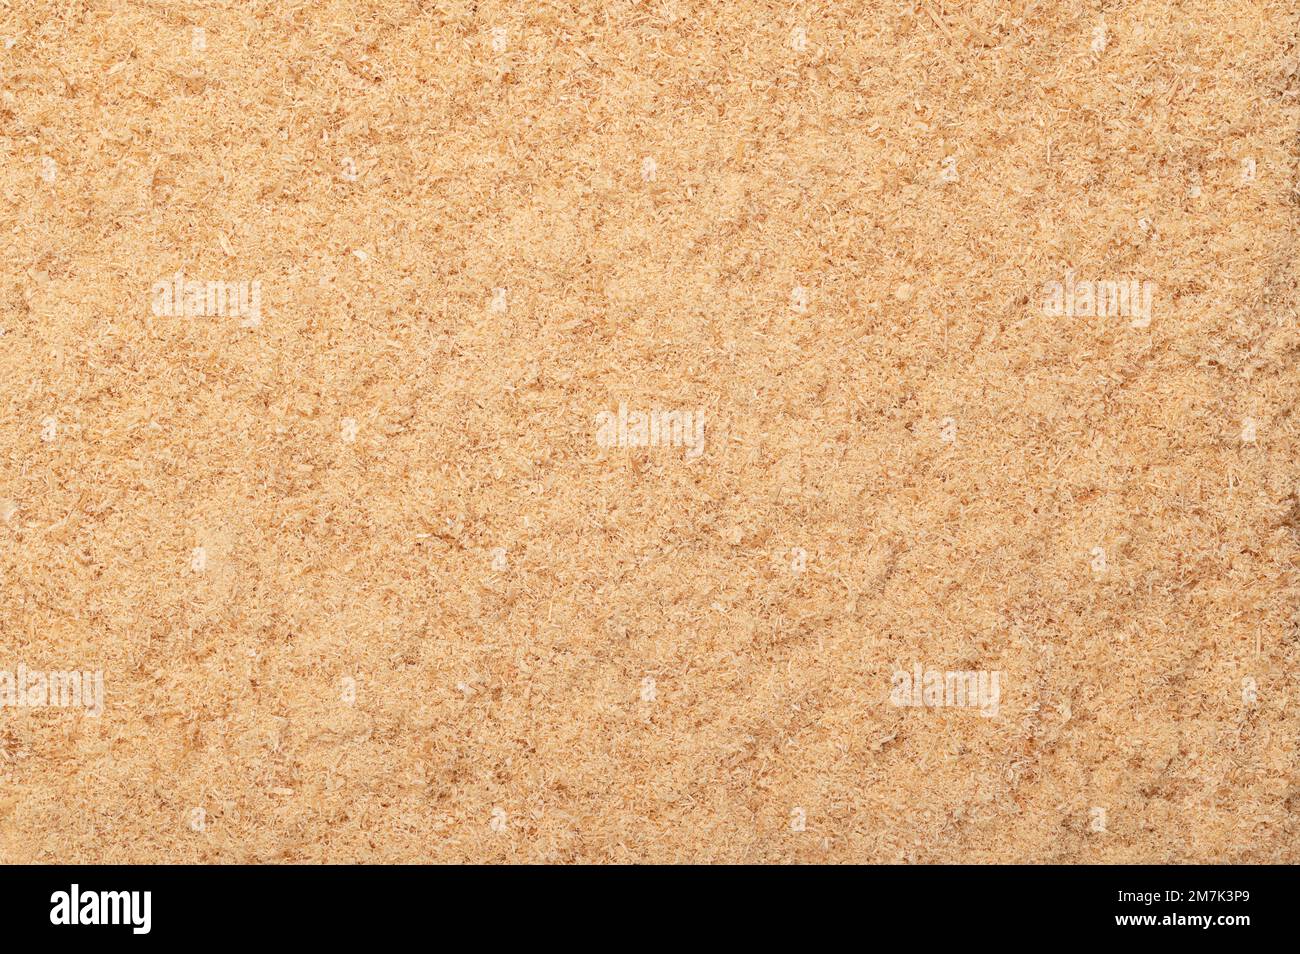 Fine sawdust, a wood flour and powder, formed by sawing dried spruce. Finely pulverized wood, a by-product and waste product, mainly used as additive. Stock Photo